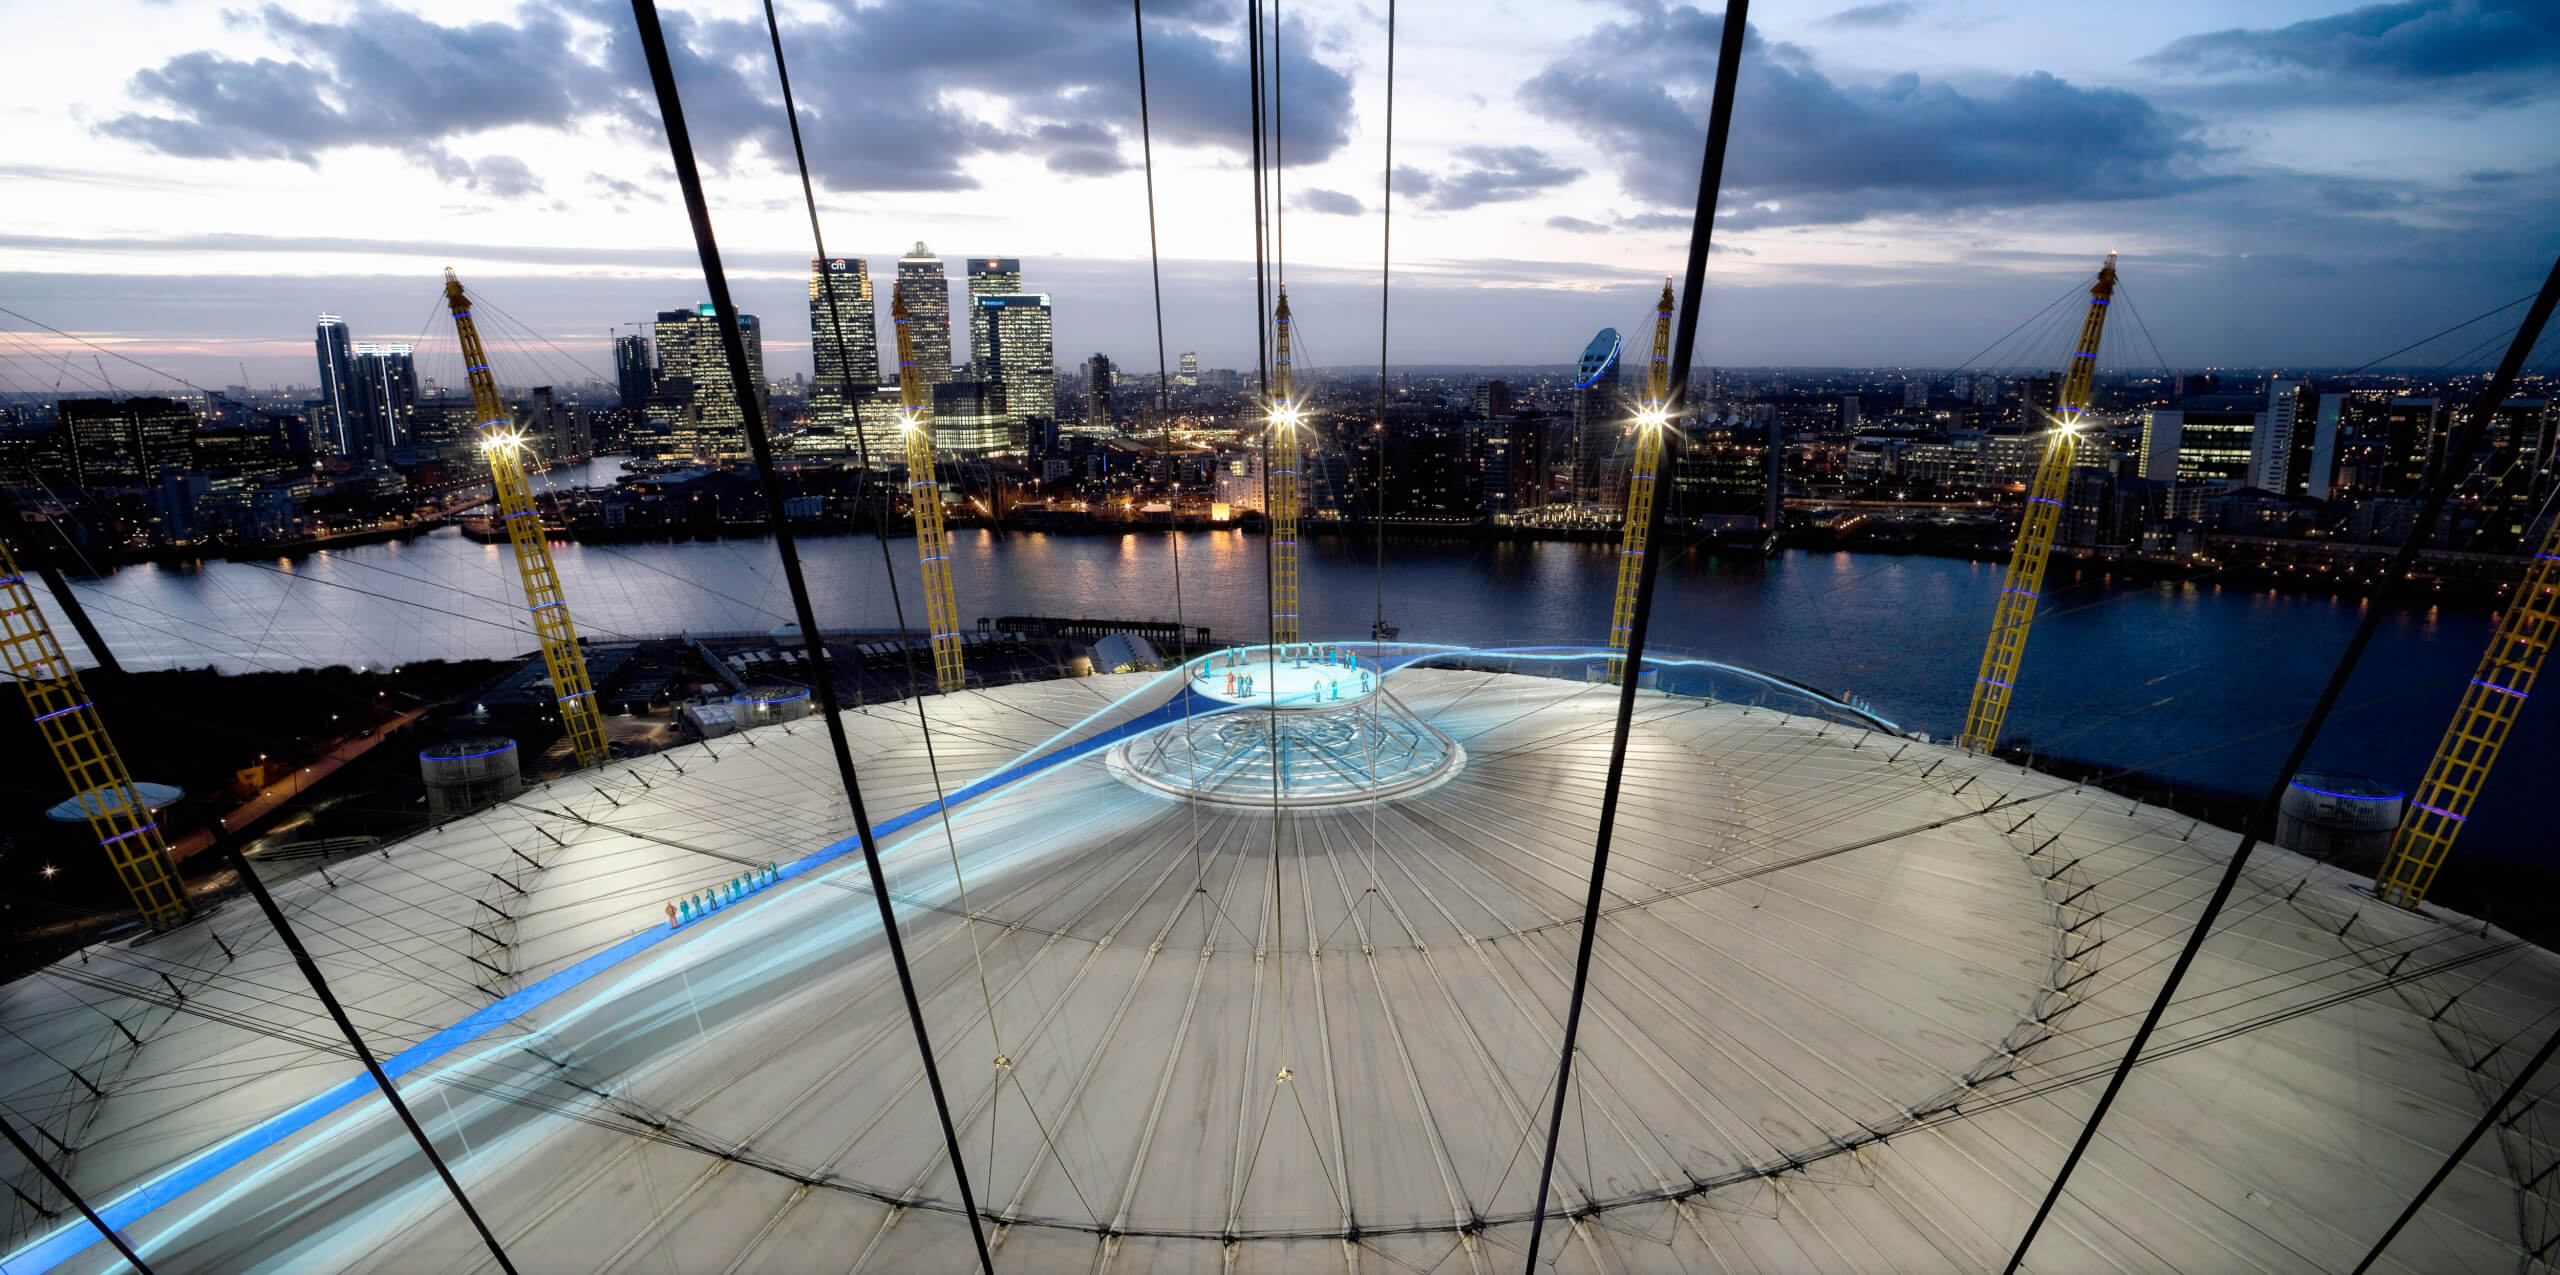 Top 5: Simply Sensational Father's Day Ideas in London, Father's Day Ideas in London,greenwich, the 02, adrenaline, aqua shard, grooming, shaving, london, what's on, events, top, expensive, high-end, cool, food, foodie, steak, wet shave, barber, up at the 02, climbing, wall climbing, rock climbing, outdoor, activity, adventure, sports